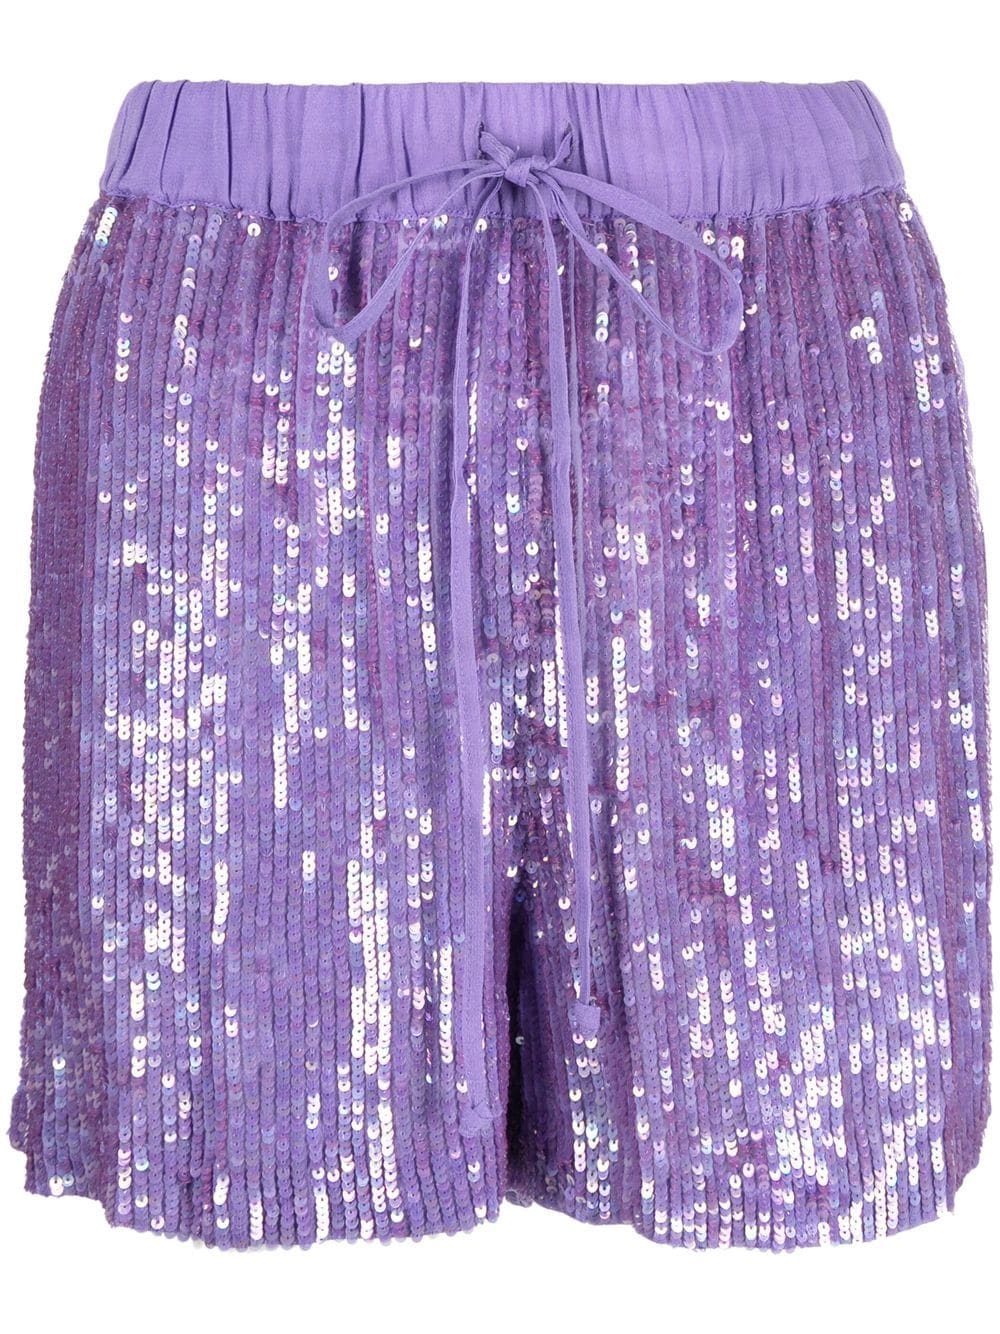 P.A.R.O.S.H. sequin-embellished drawstring shorts - Purple von P.A.R.O.S.H.